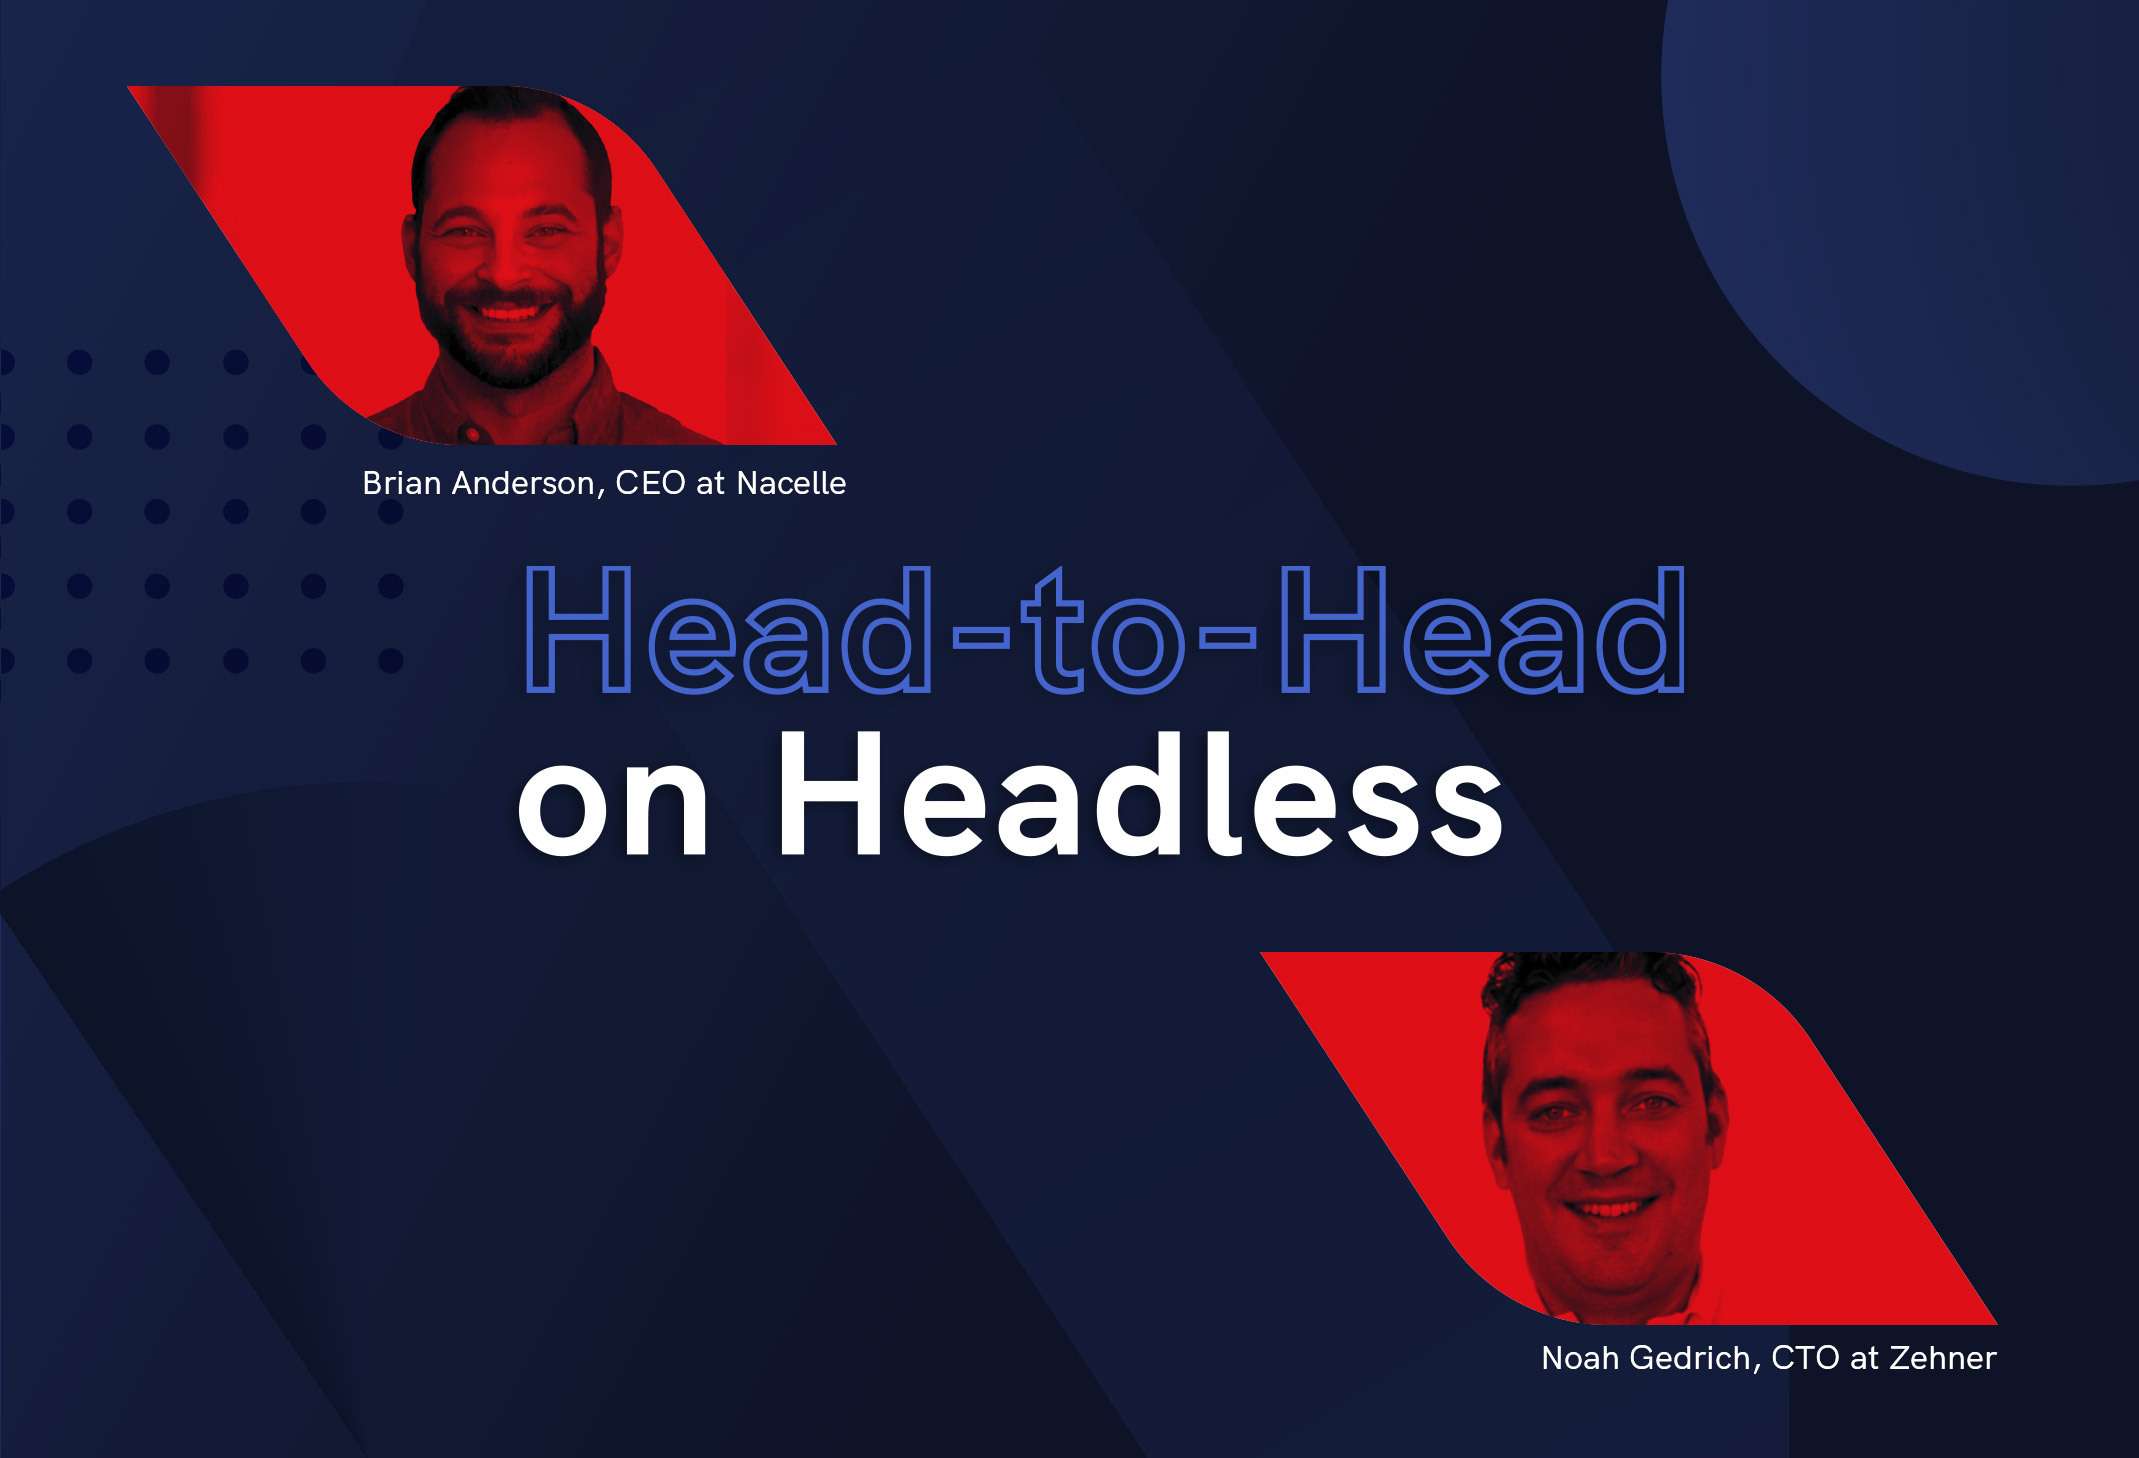  Highlights from head-to-head on headless with Noah Gedrich 